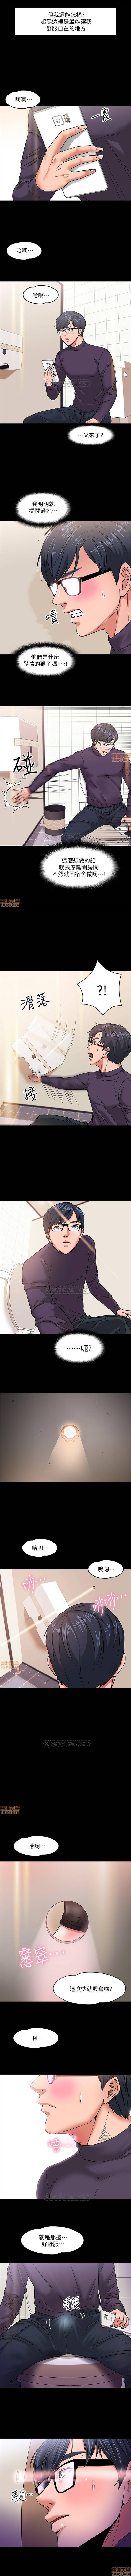 PROFESSOR, ARE YOU JUST GOING TO LOOK AT ME? | DESIRE SWAMP | 教授，你還等什麼? Ch. 1 [Chinese] Manhwa 